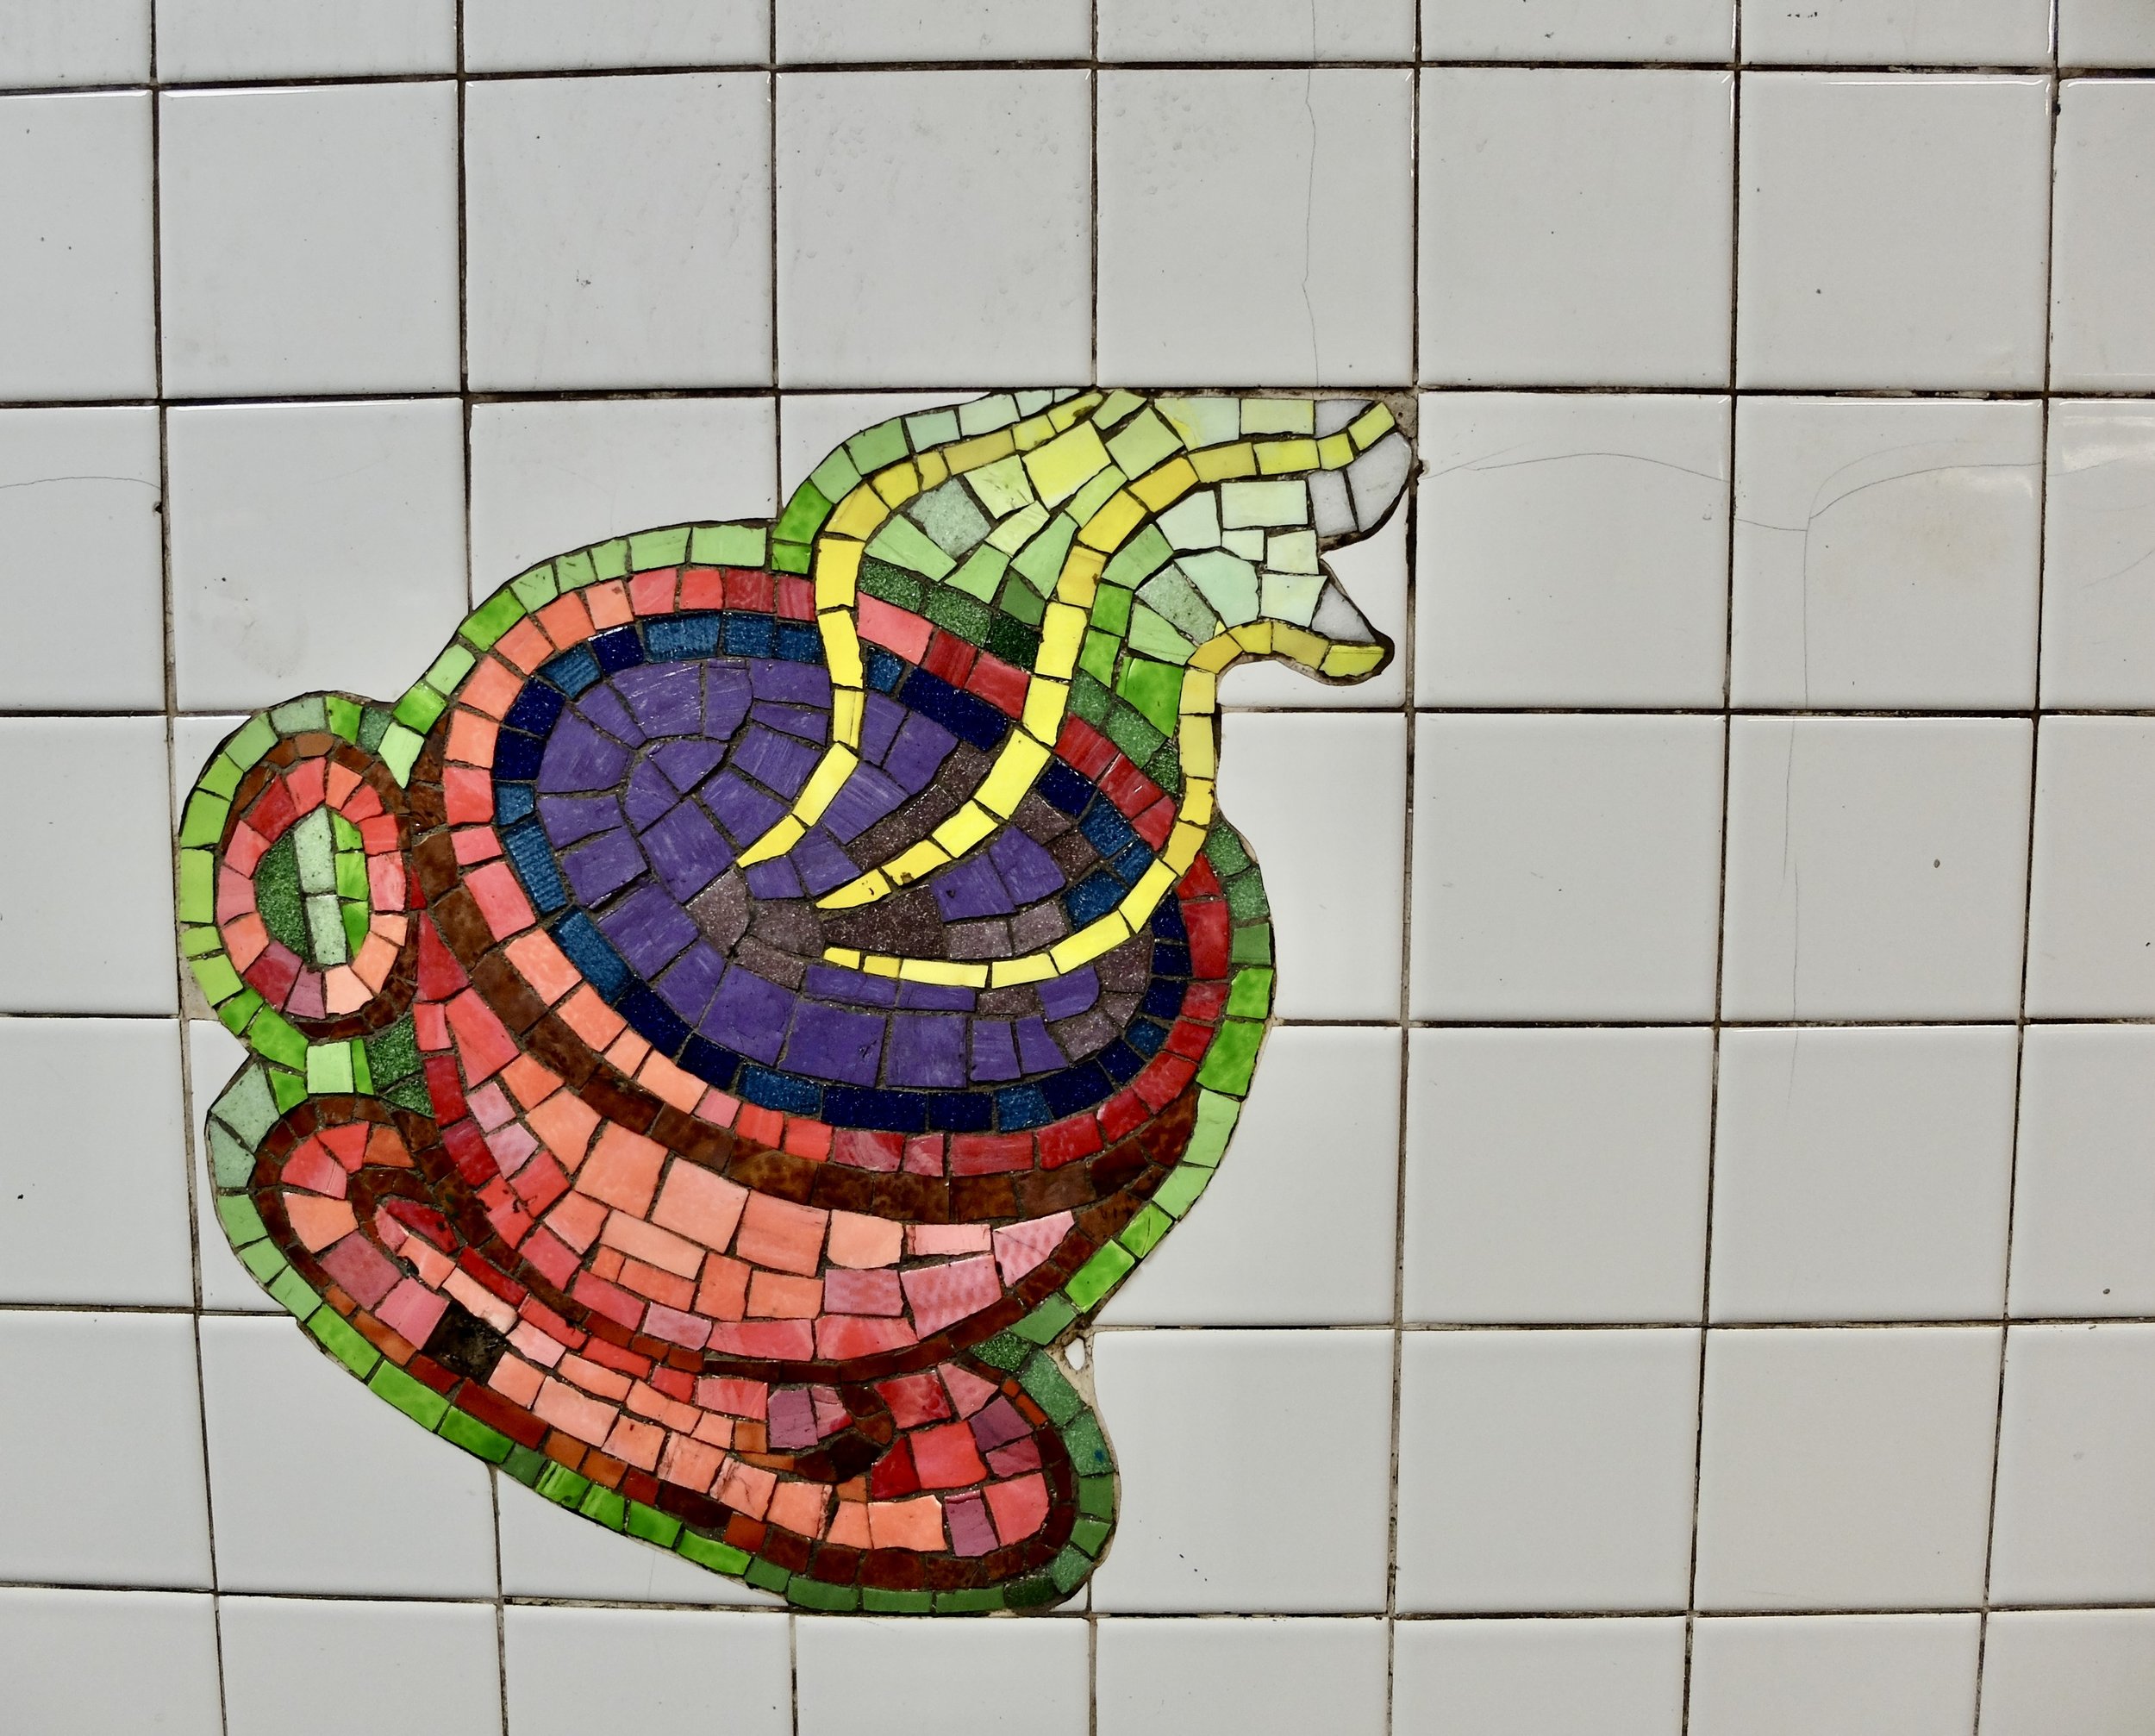  59th St./ Lexington Ave. Subway Sta.  Artist Elizabeth Murray's mosaic tile coffee cups scattered throughout the station as part of a larger mosaic tile installation called "Blooming."  More in another posting. 